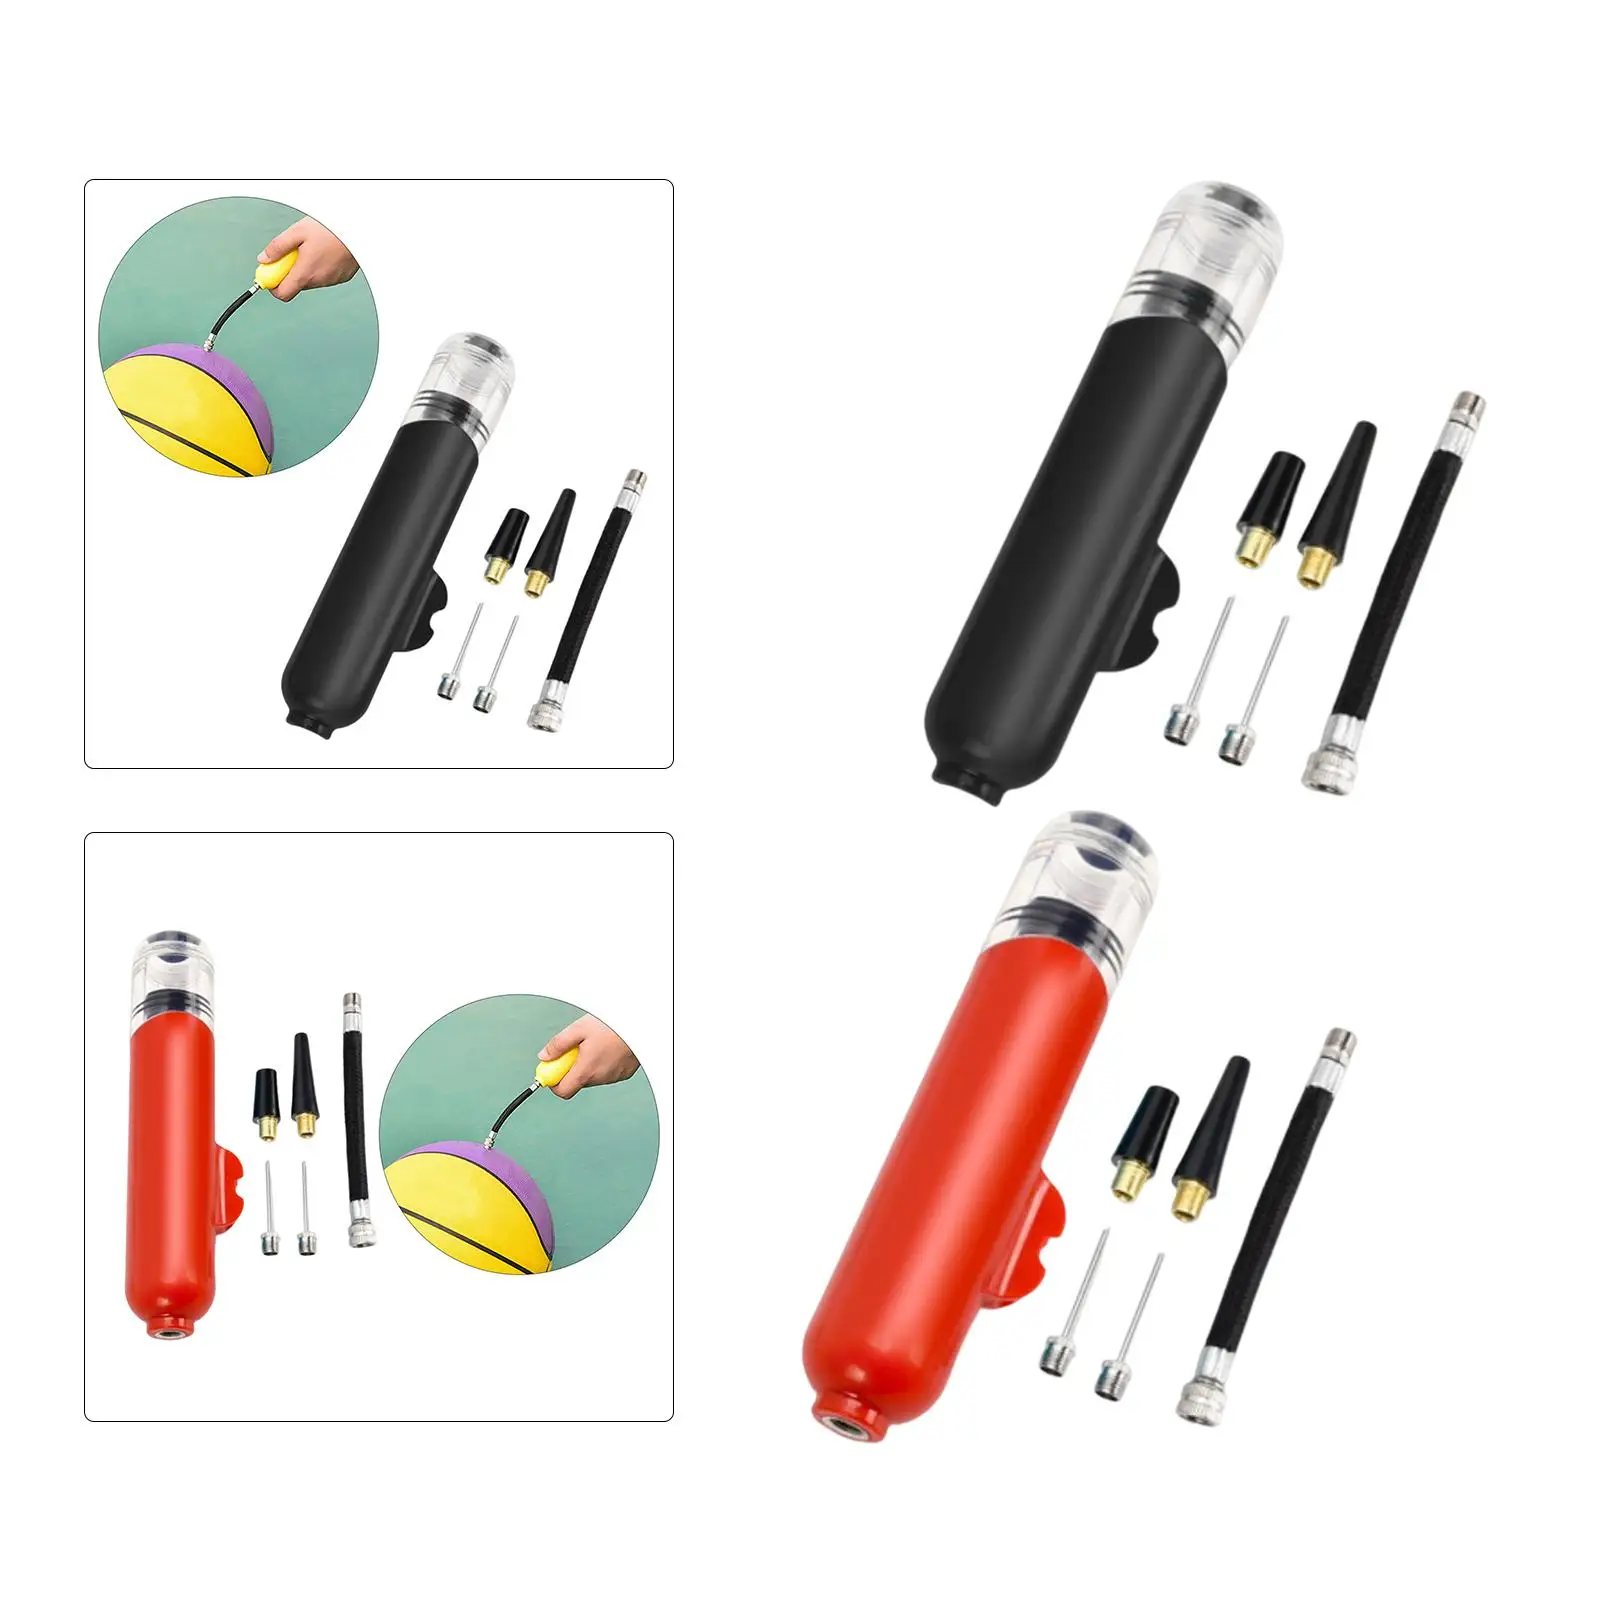 Mini Pump for Bike Fits Schrader and Presta Valve Hand Pump for Bicycle Balloon